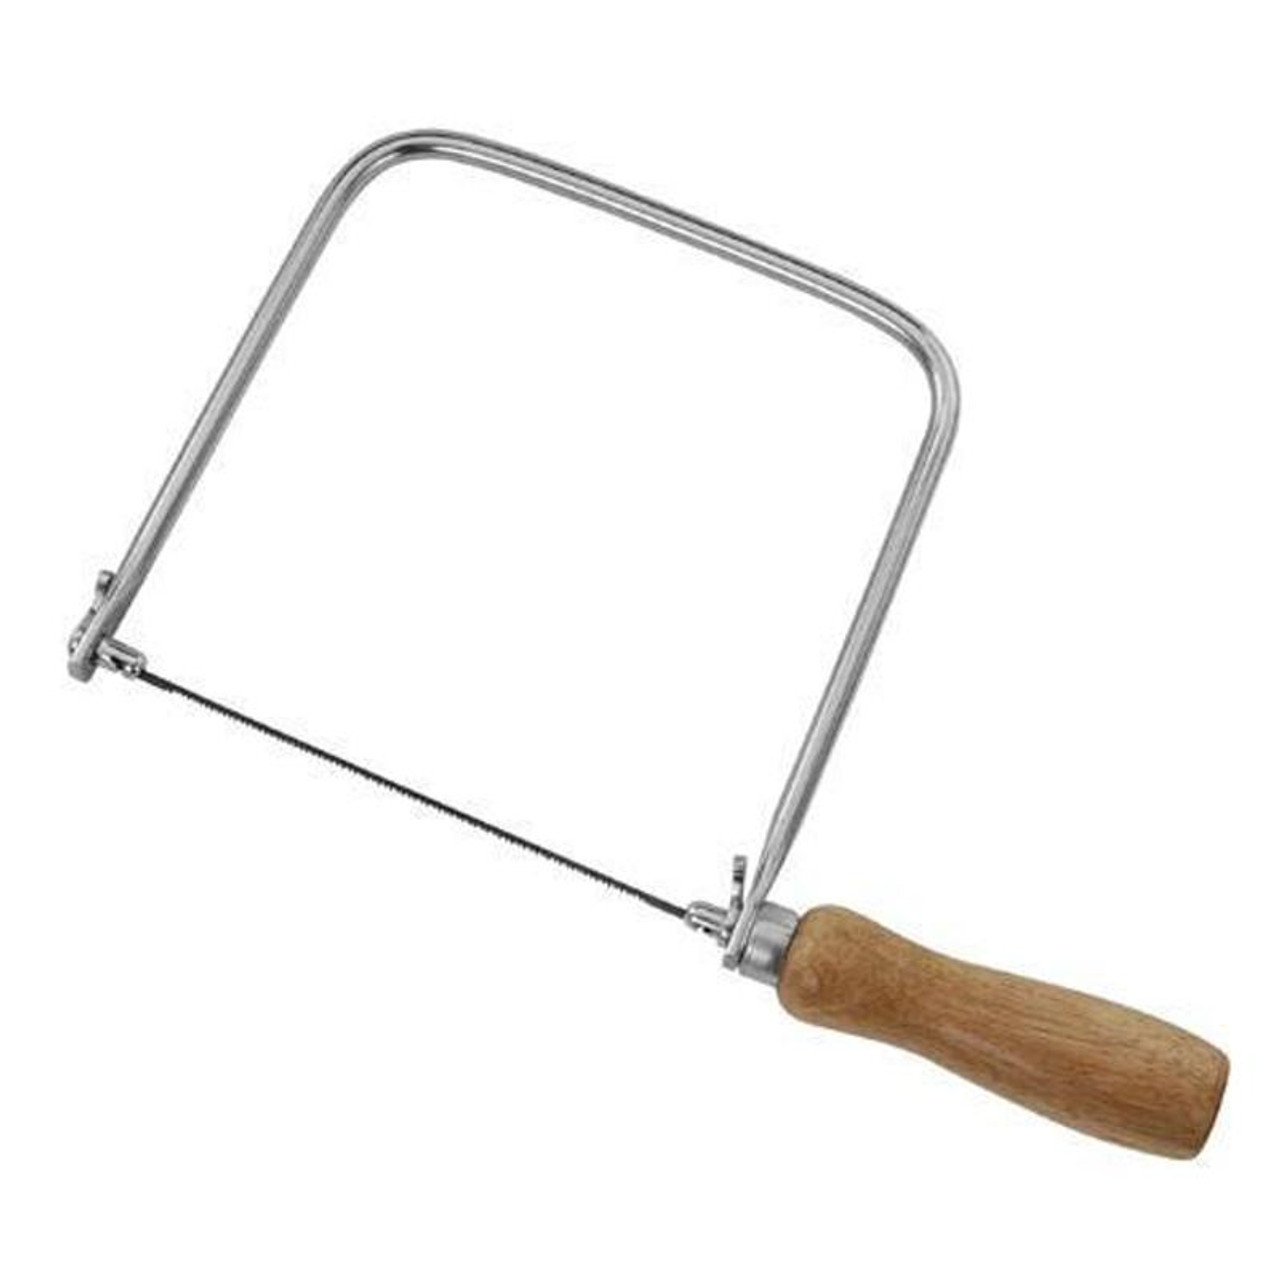 Coping Saw Blade 6-1/2 15 TPI - No. 15-061 - Whitehead Industrial Hardware